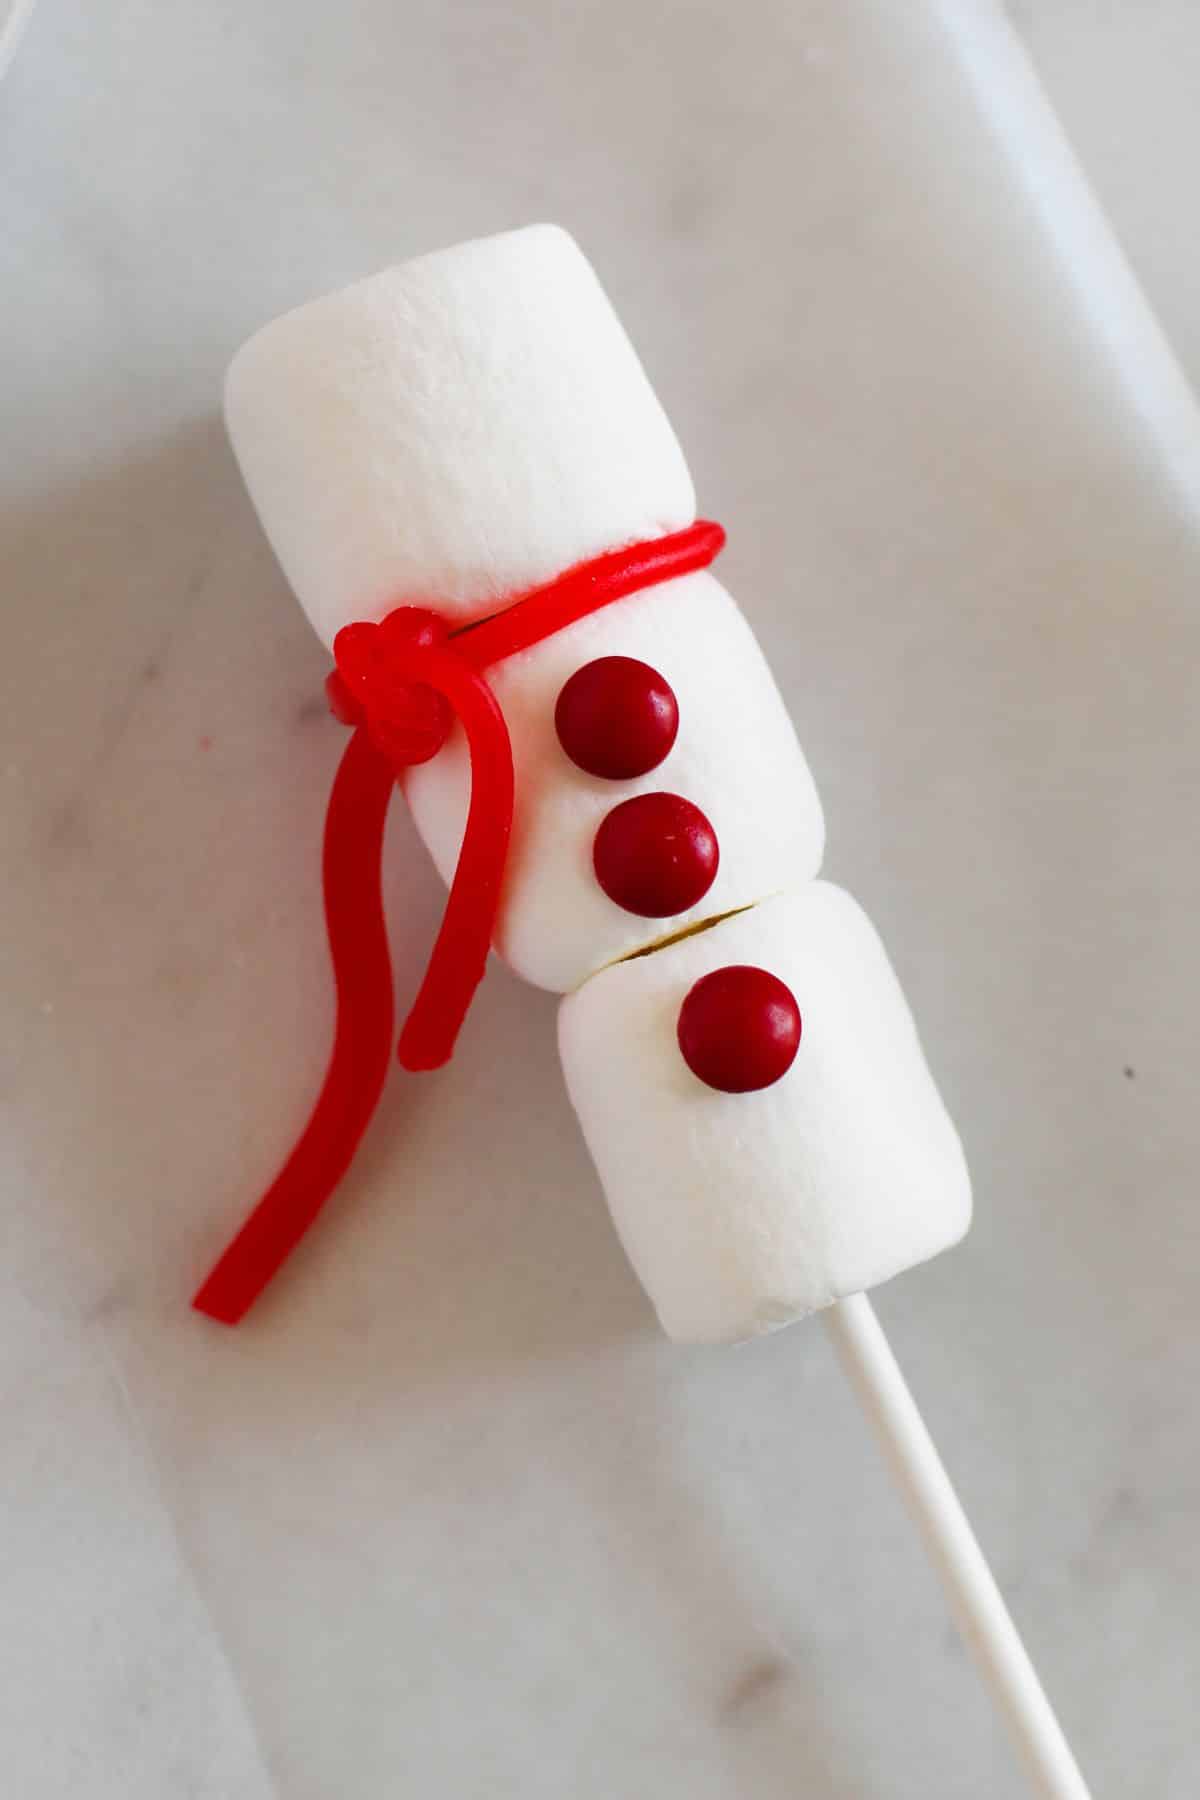 red licorice piece tied between first and second marshmallow on stick to look like a scarf